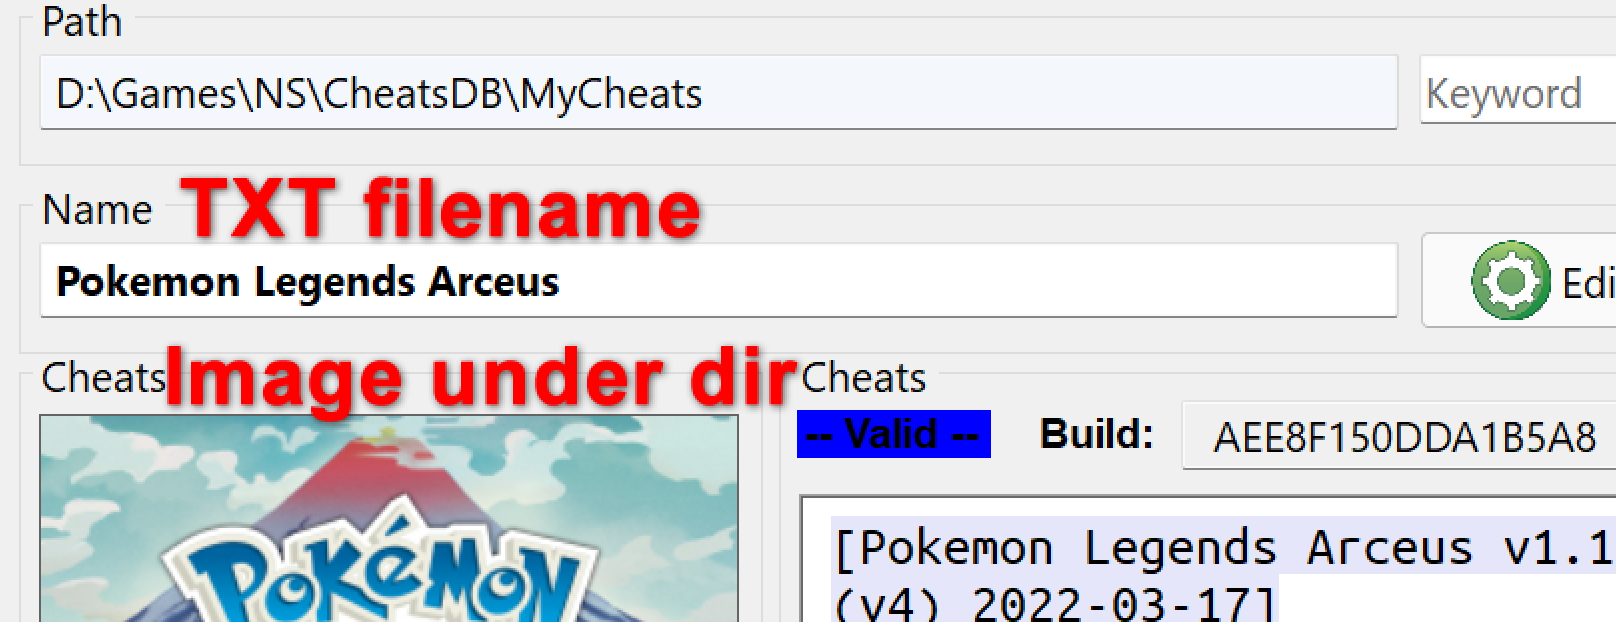 HOW TO GET CHEATS FOR NINTENDO SWITCH FOR ALL GAMES (Edizon Guide) 